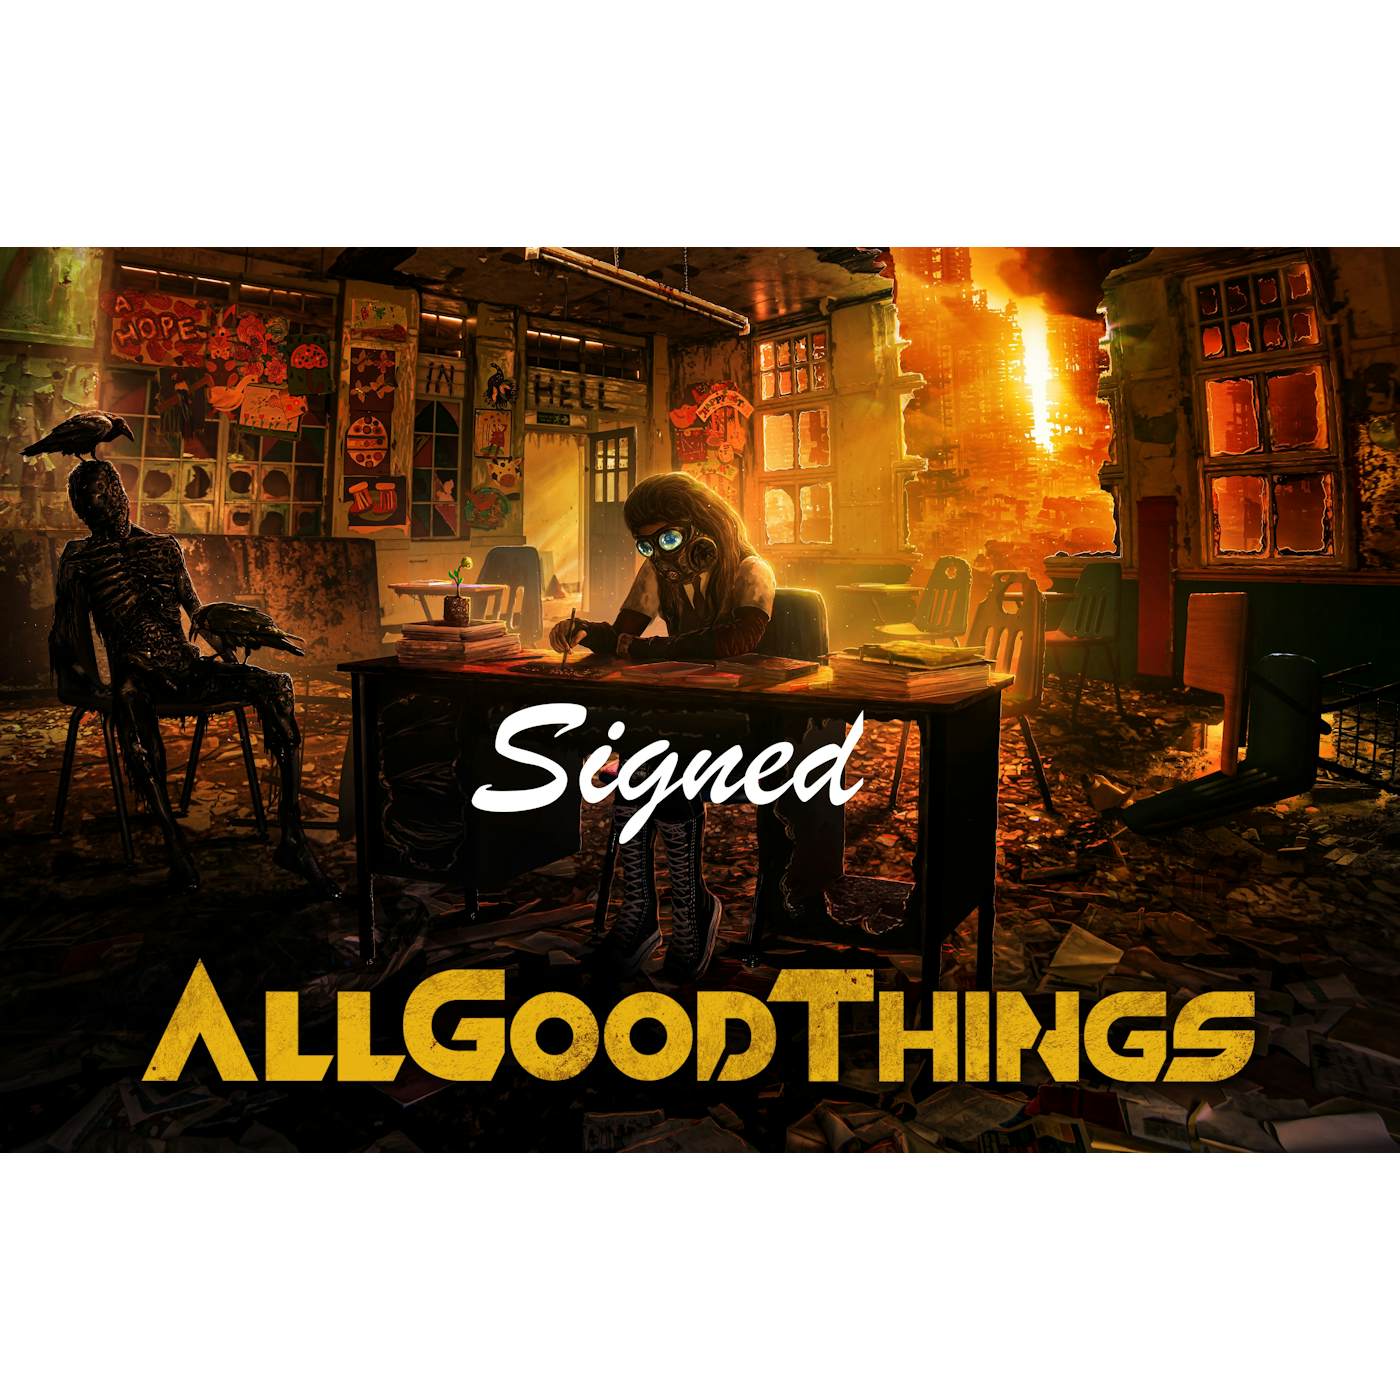 ALL GOOD THINGS - "A HOPE IN HELL" POSTER **SIGNED**